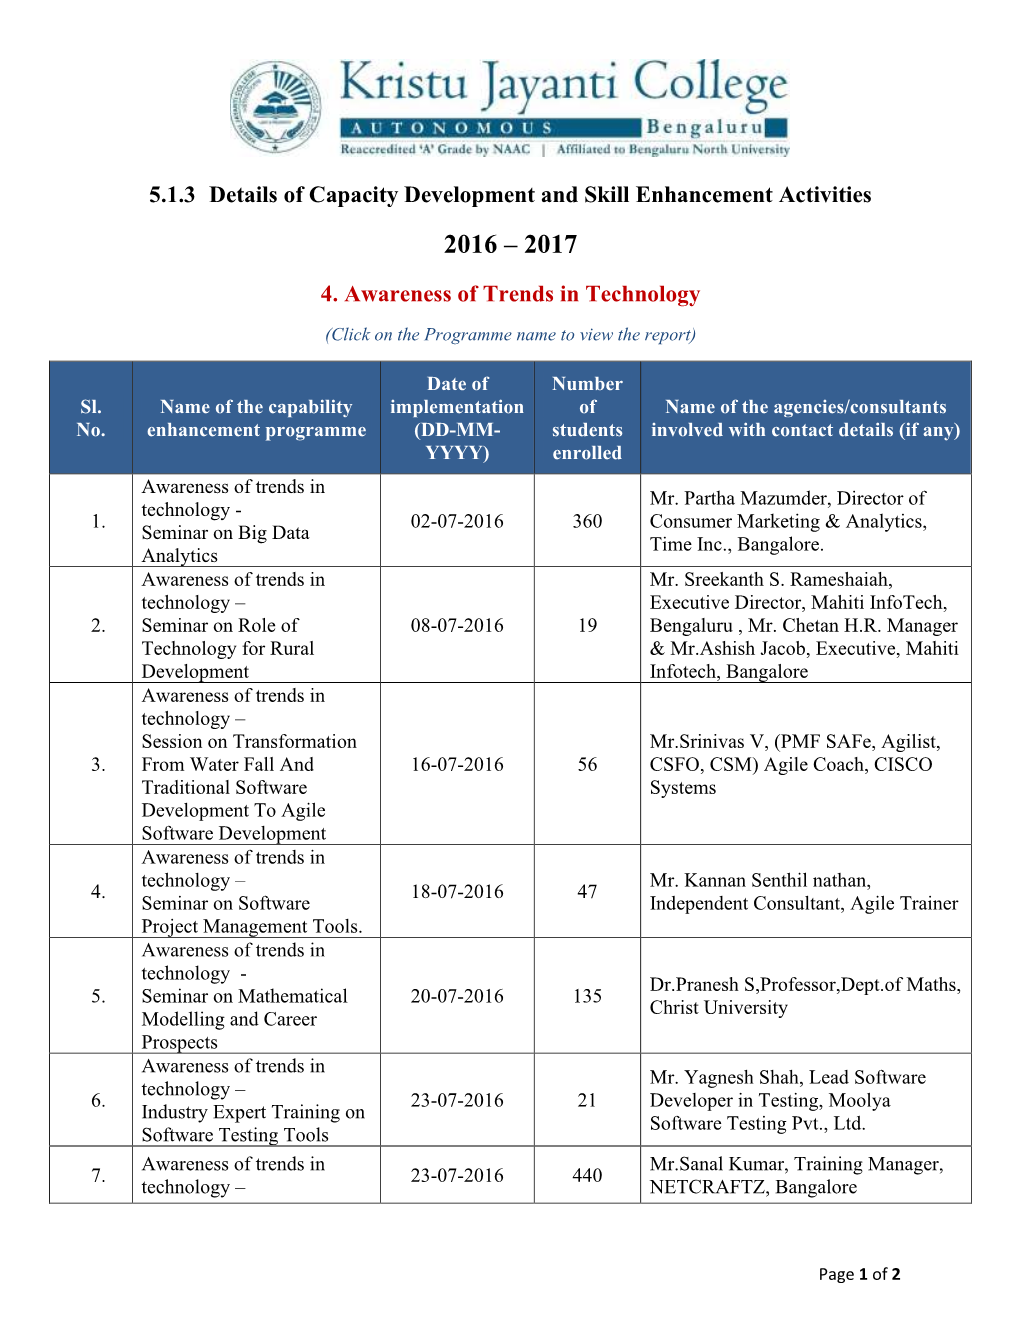 5.1.3 Details of Capacity Development and Skill Enhancement Activities 4